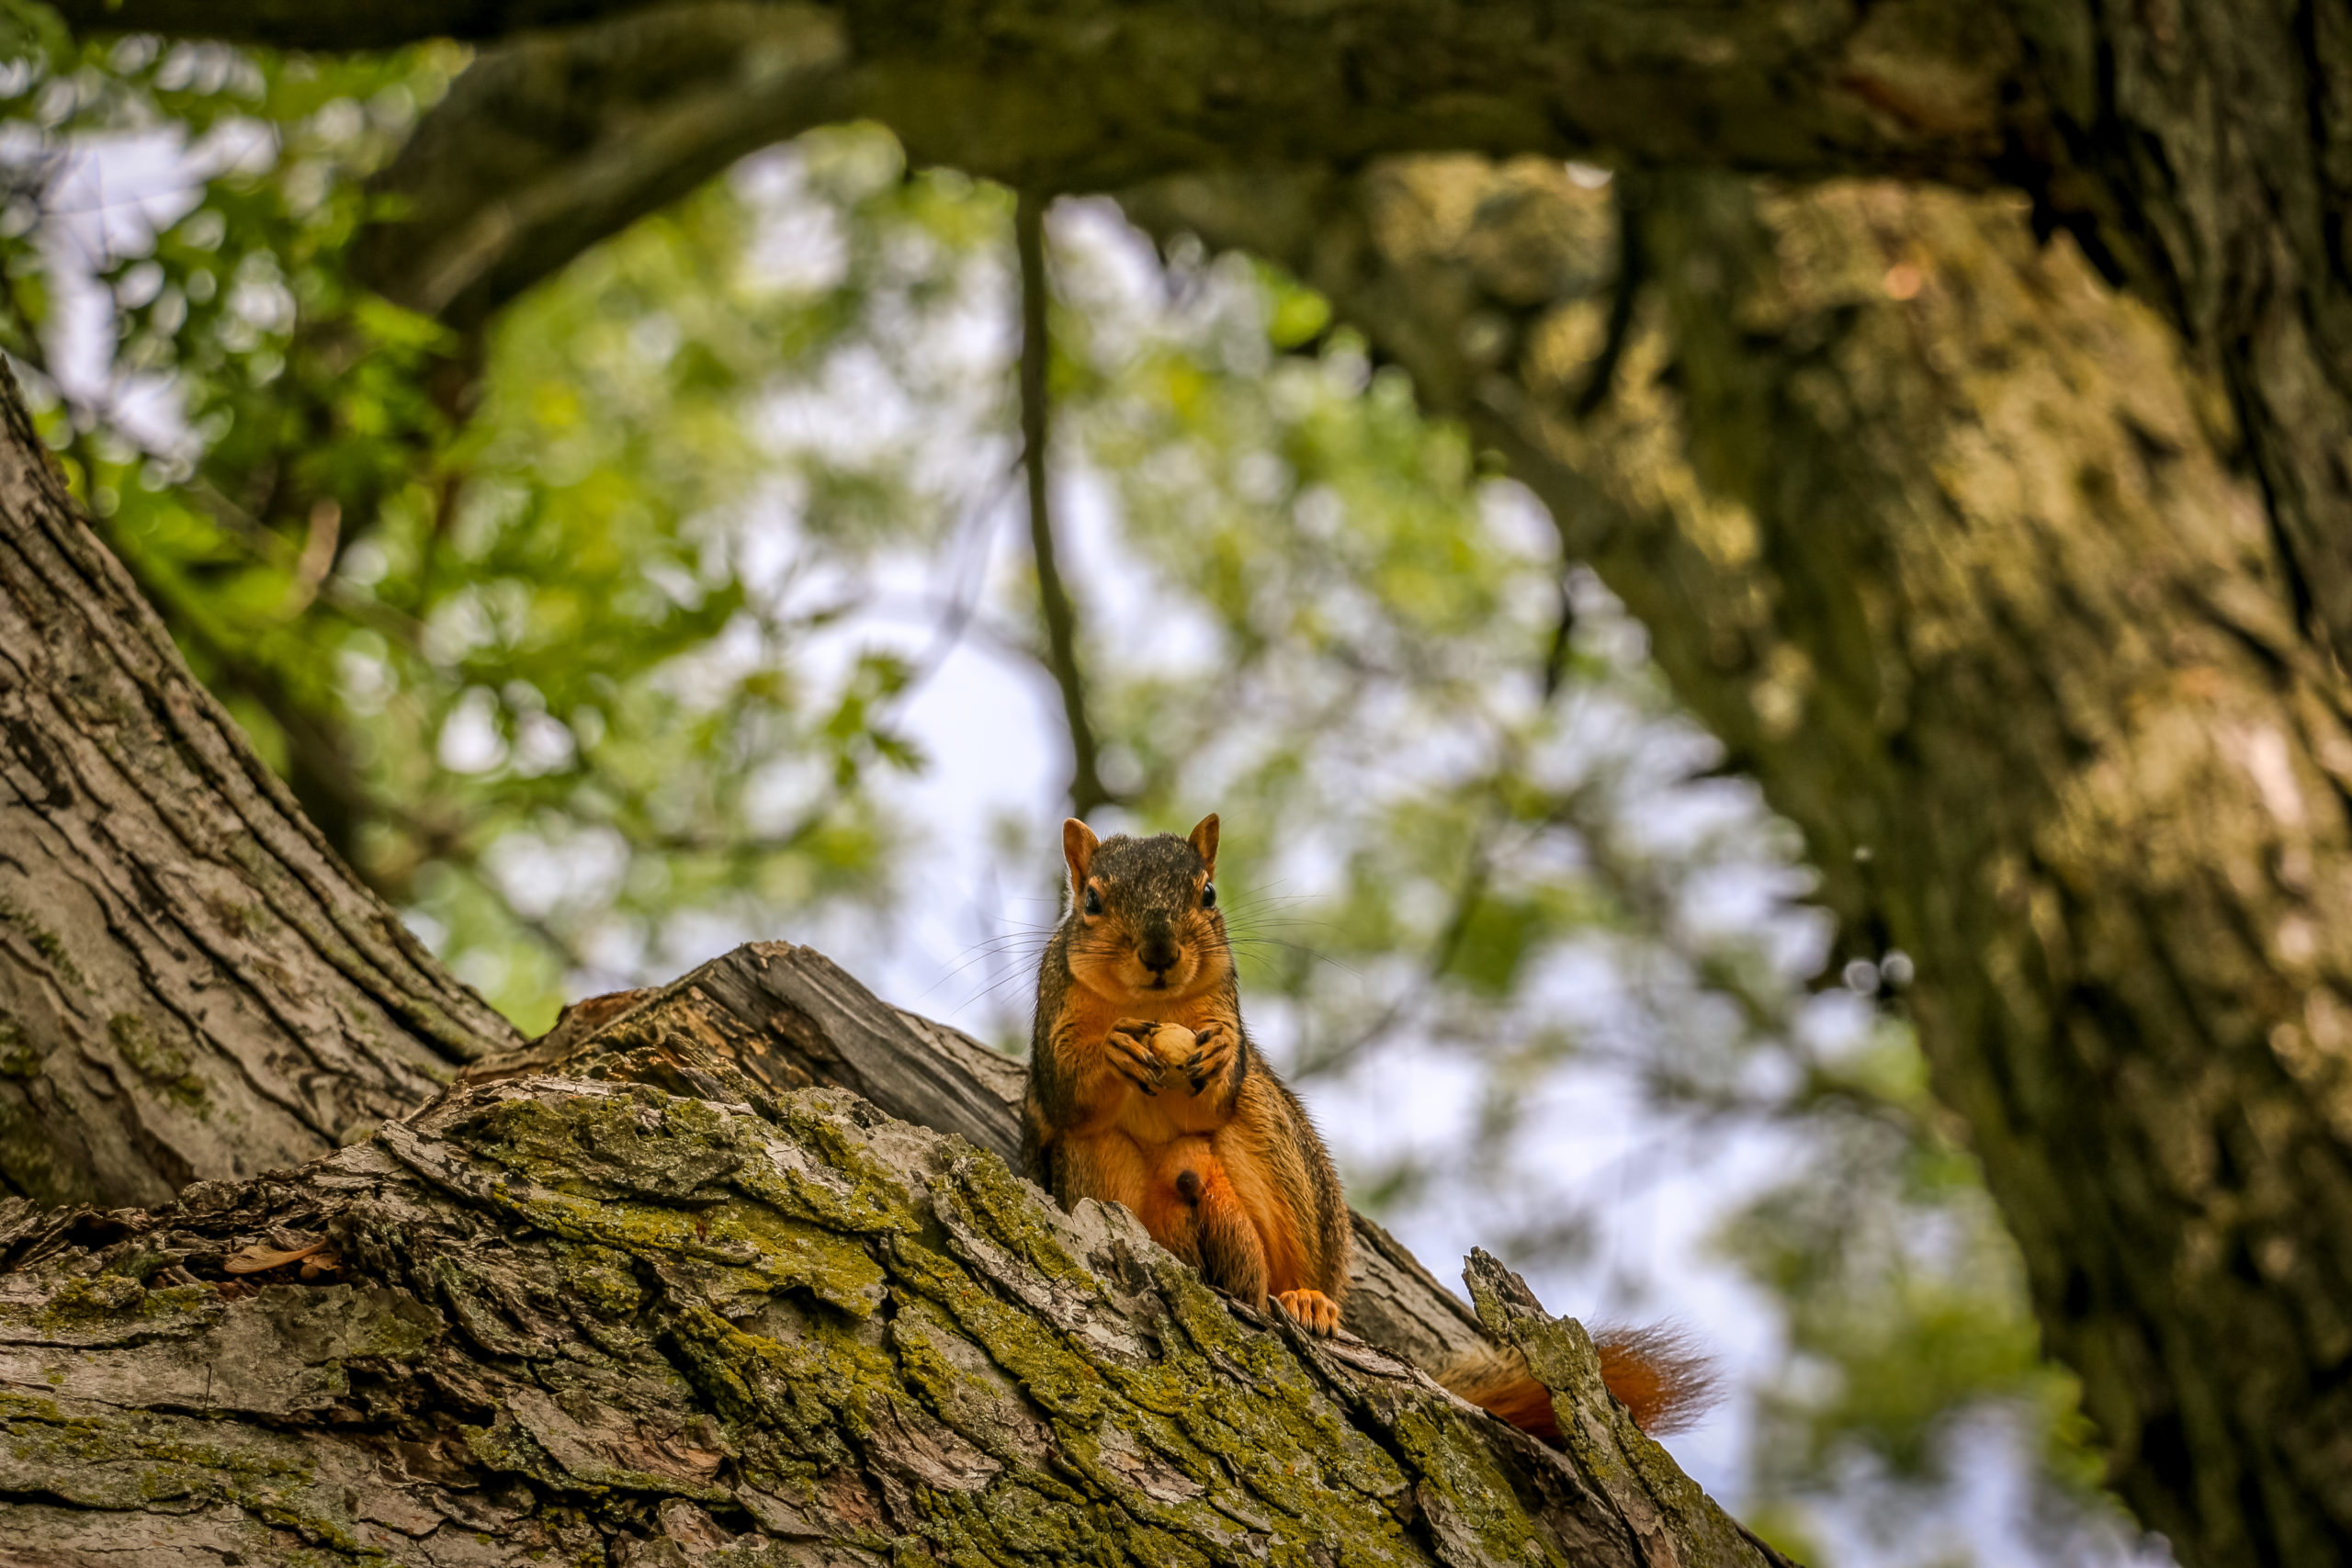 A squirrel holding a nut perched on a tree